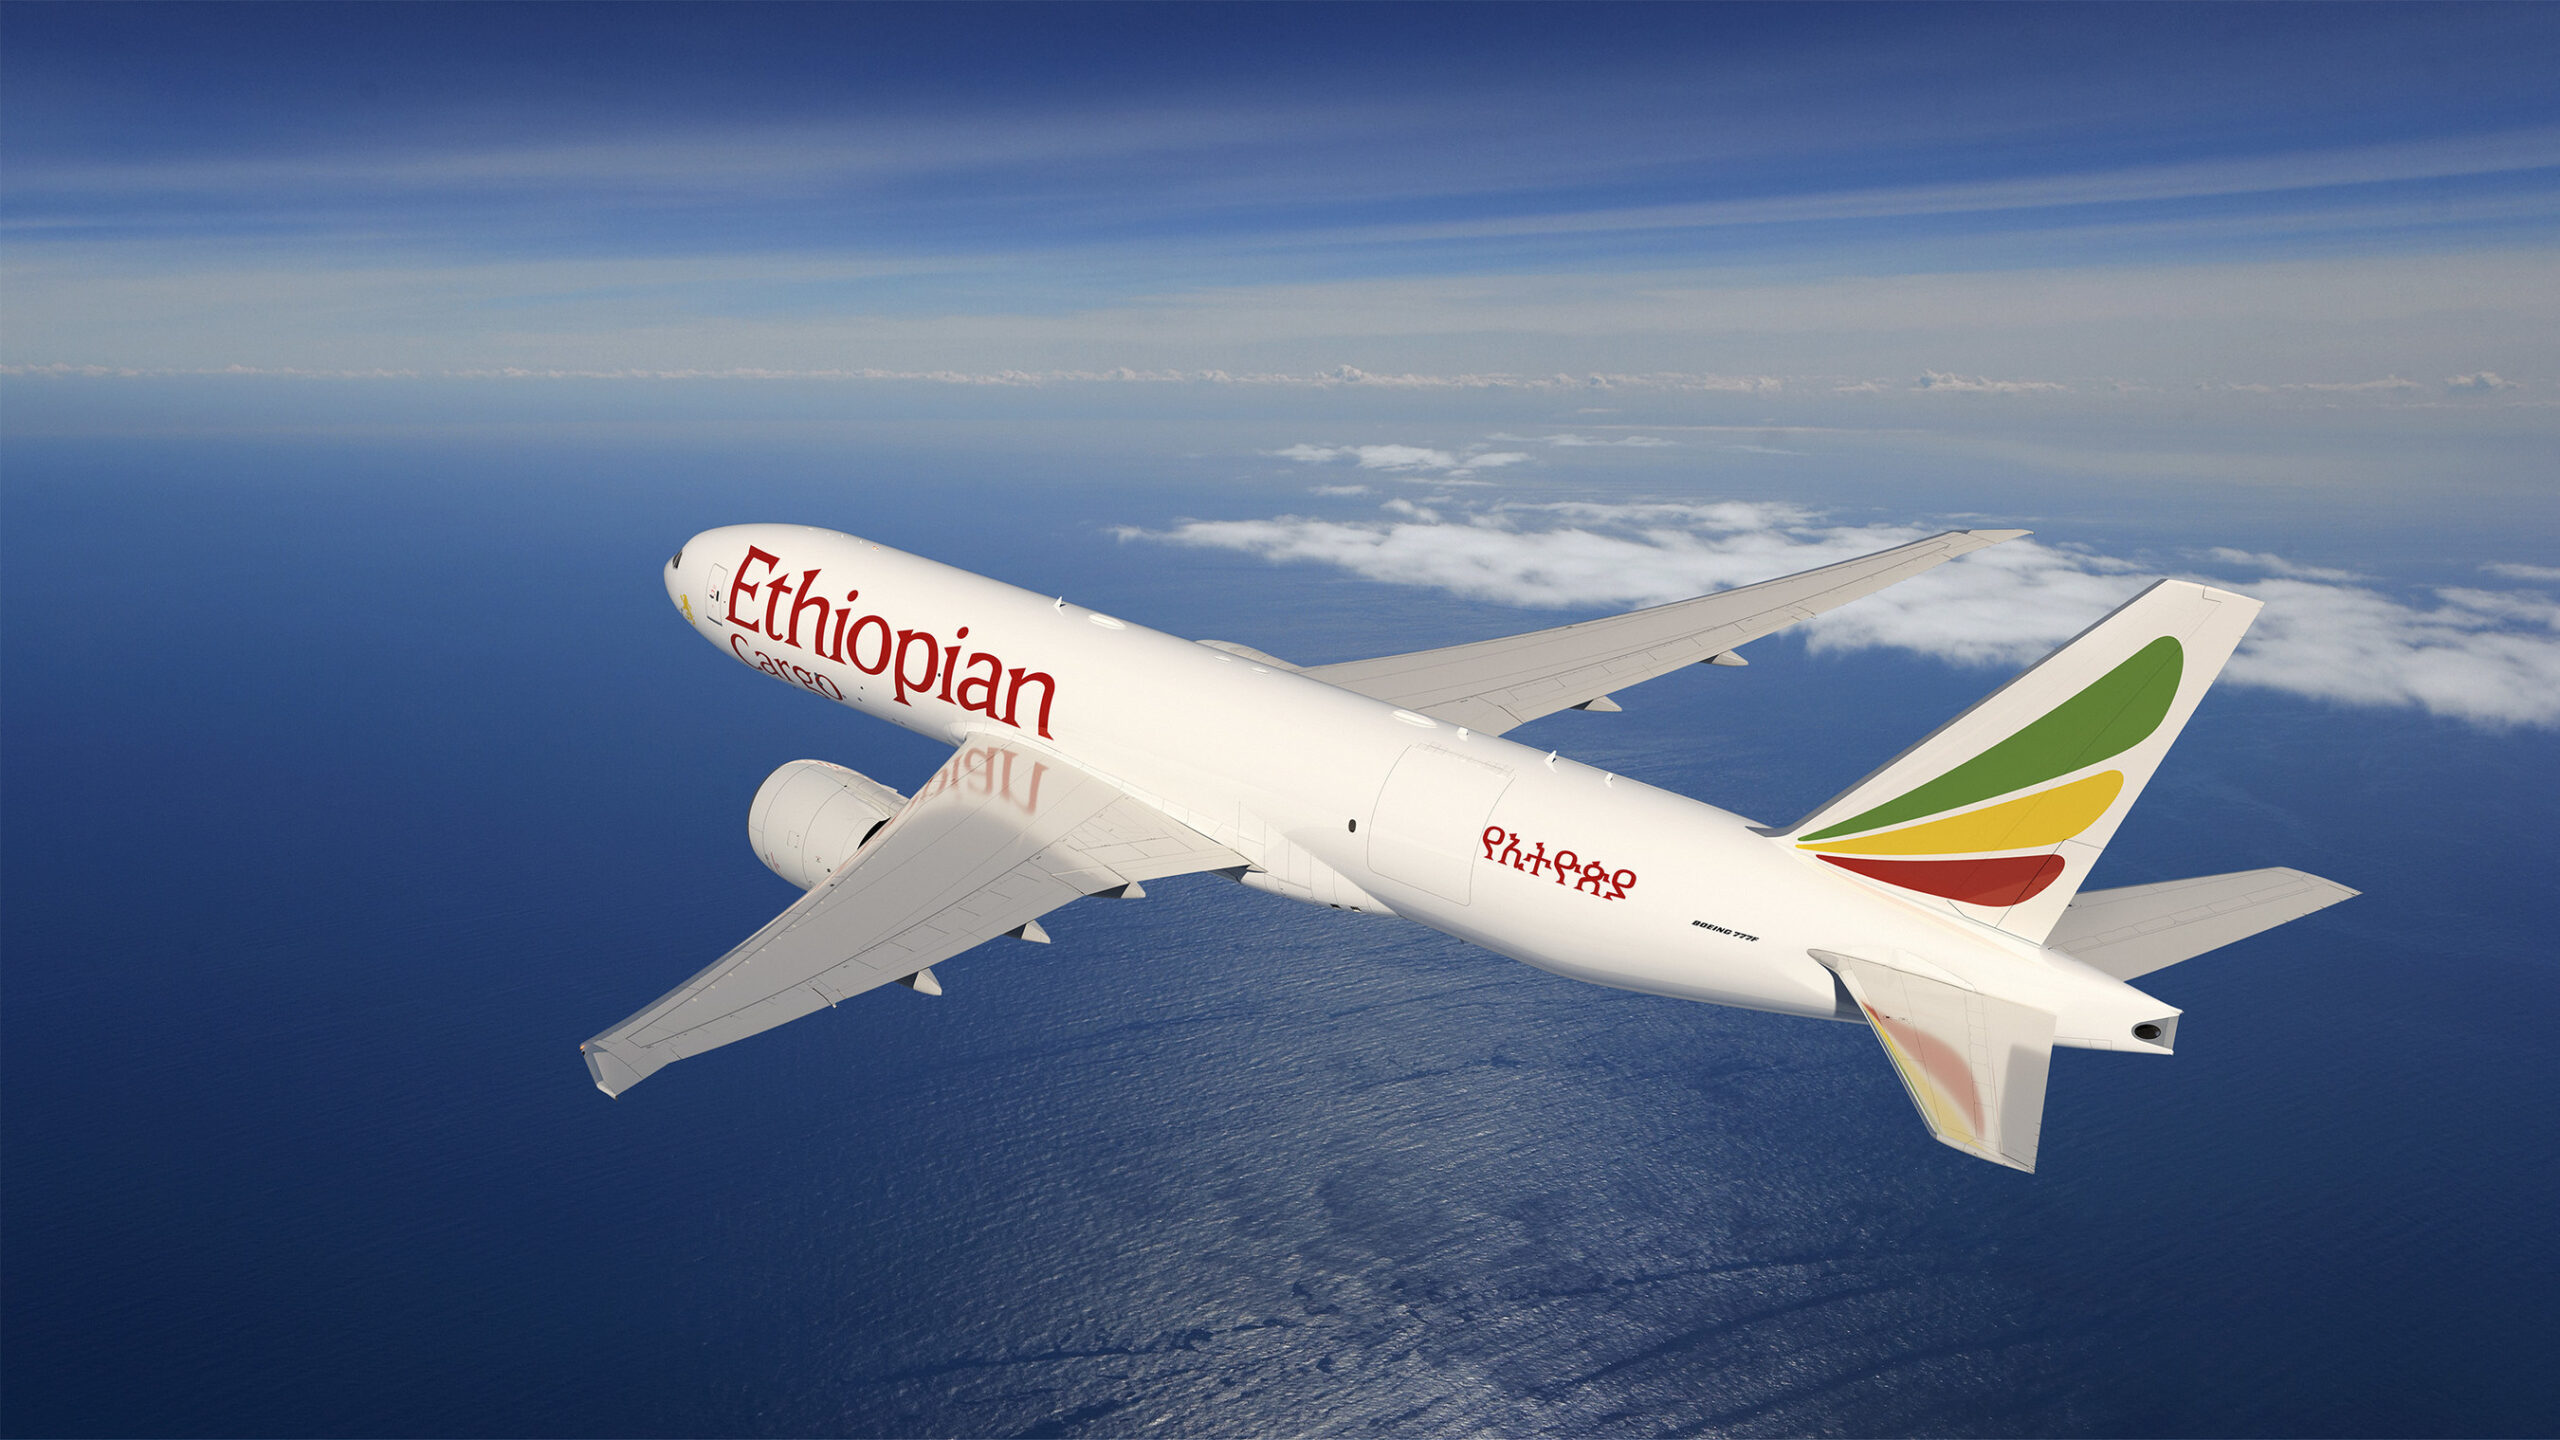 Ethiopian expands freighter network in India; adds Ahmedabad as latest destination